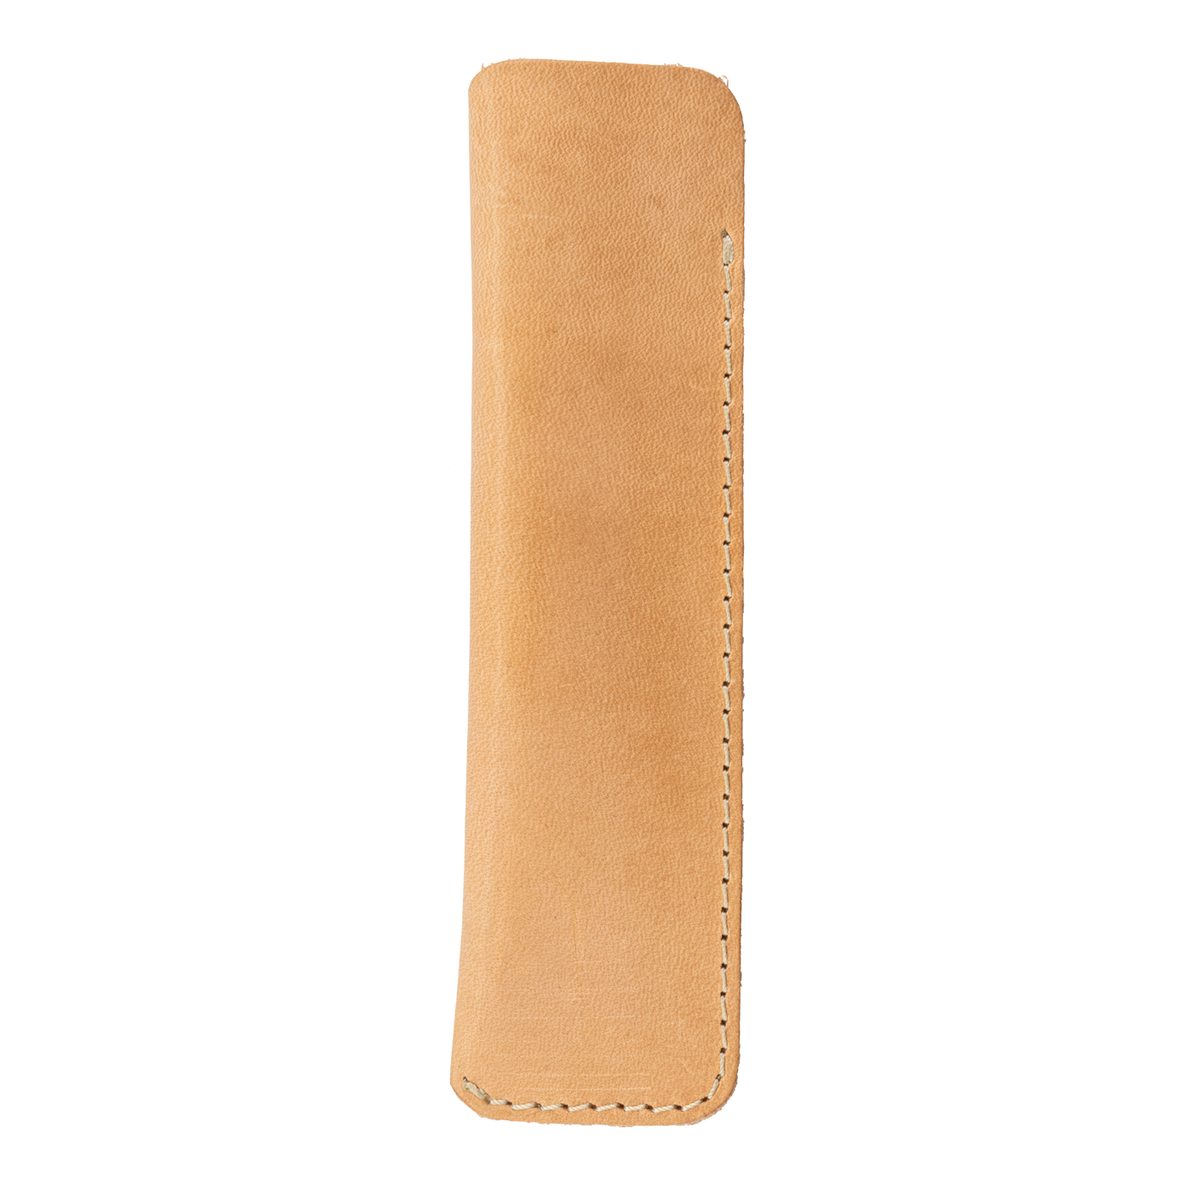 Galen Leather Co. Leather Single Pen Sleeve- Undyed Leather